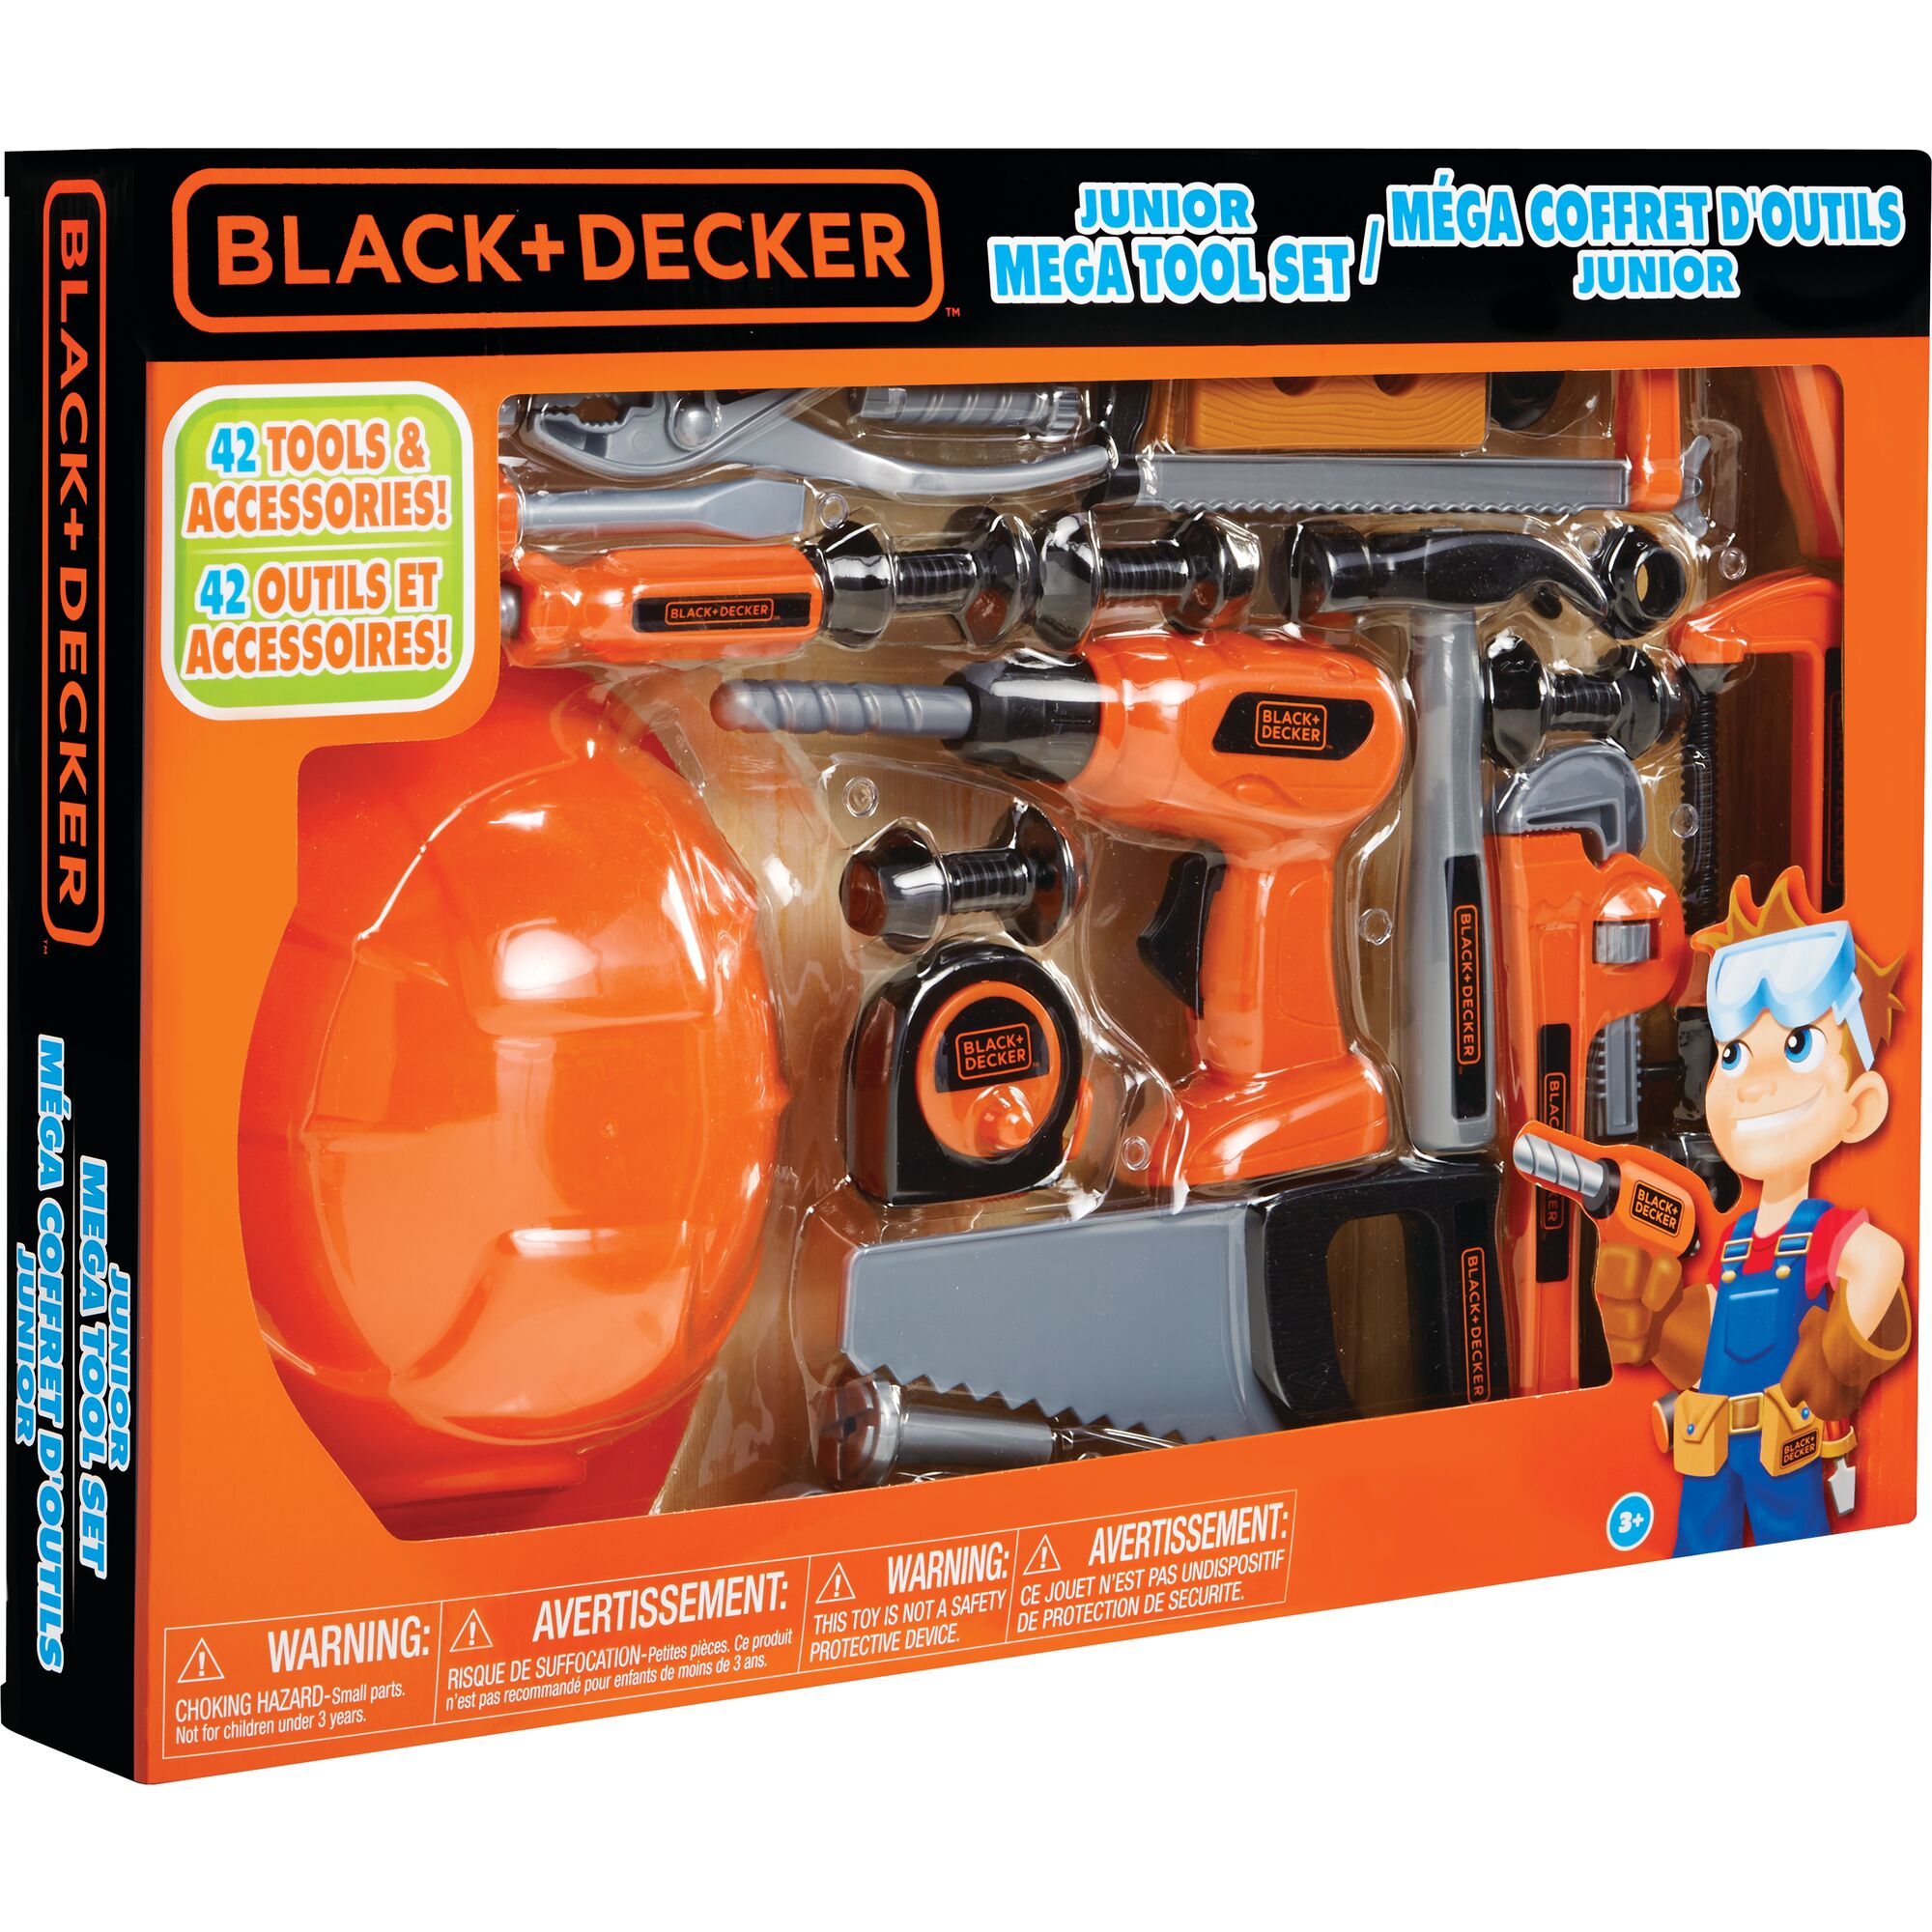 Black & Decker Six Piece Pretend Play Toolset for Kids, for Home DIYs and Creative Learning